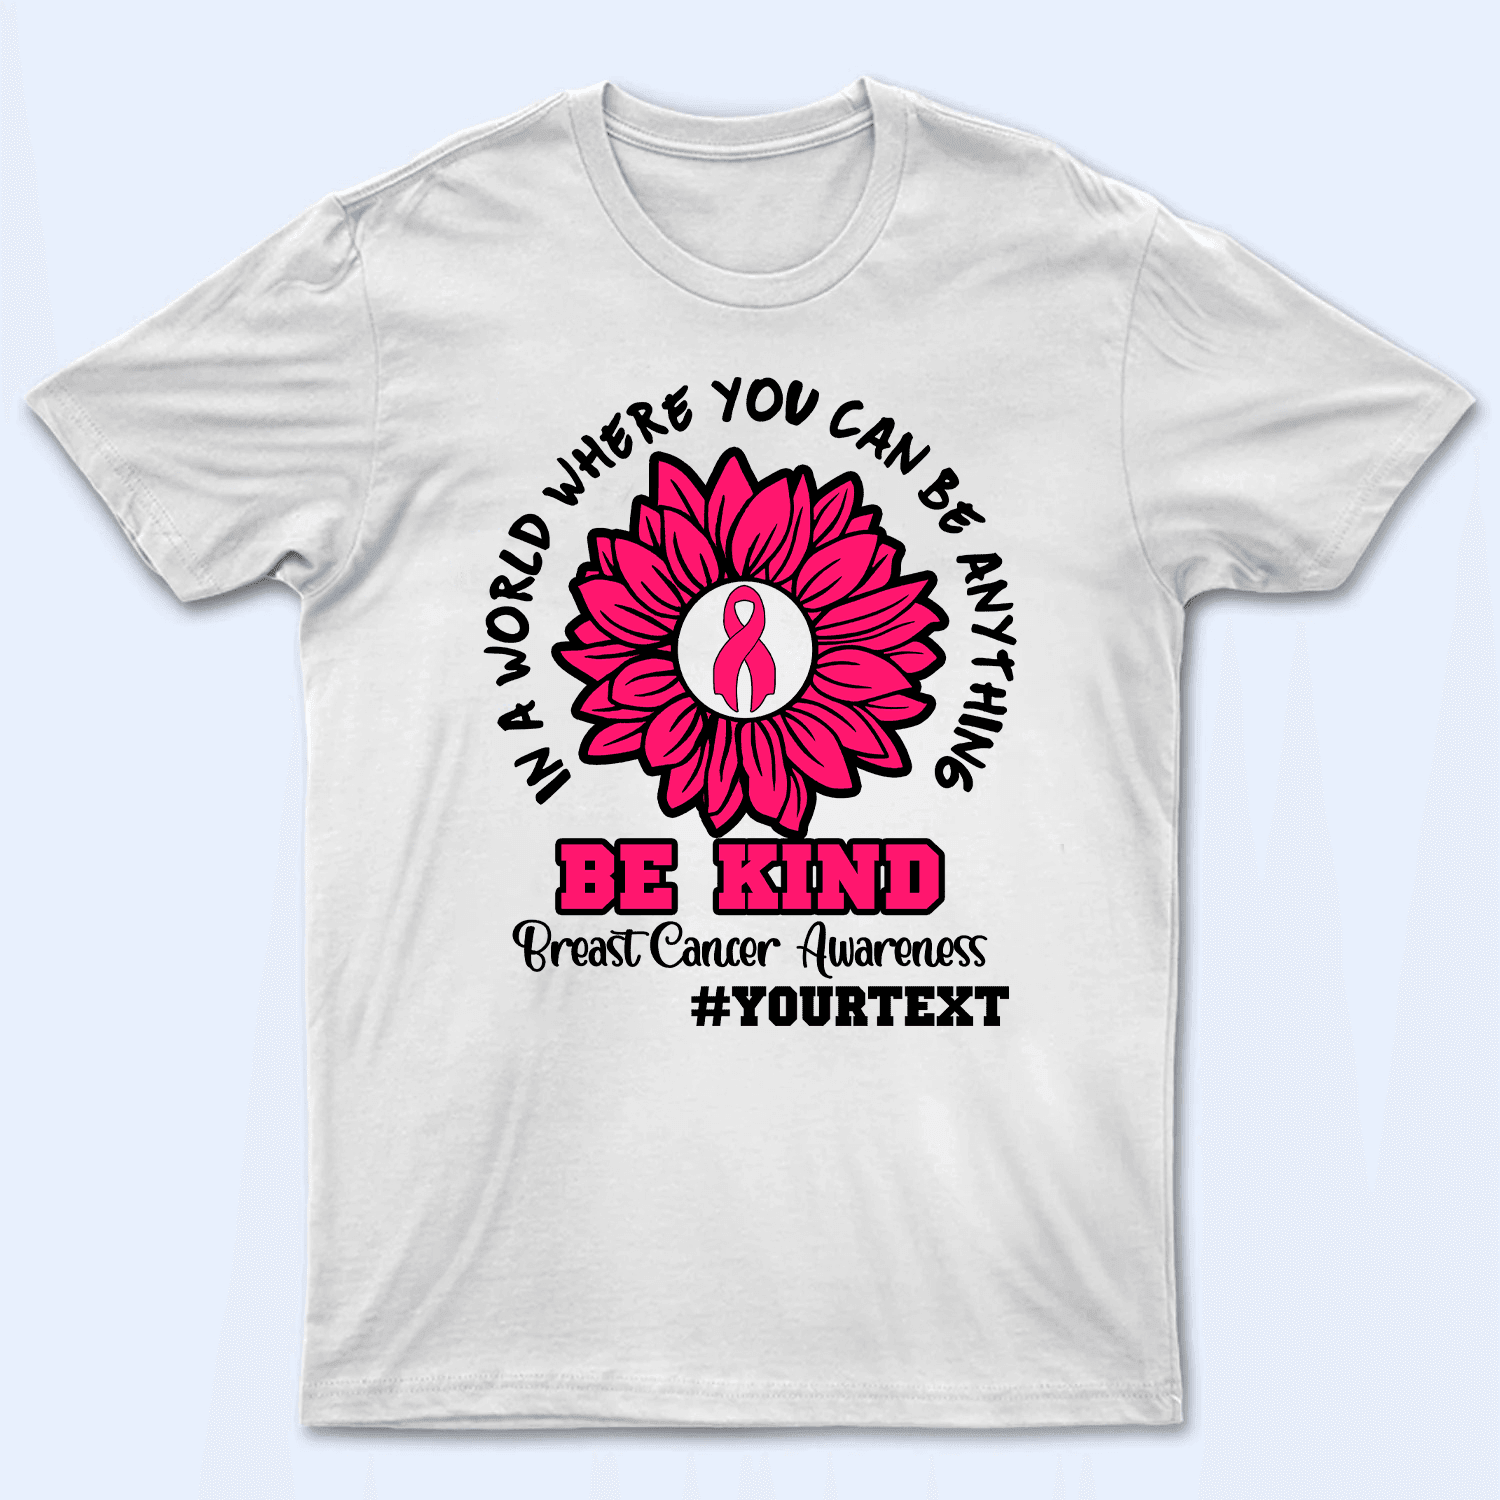 Be Kind Multiple Cancer Awareness - Personalized Custom T Shirt - Birthday, Loving, Funny Gift for Nurse, CNA, Healthcare, Registered RN - Suzitee Store